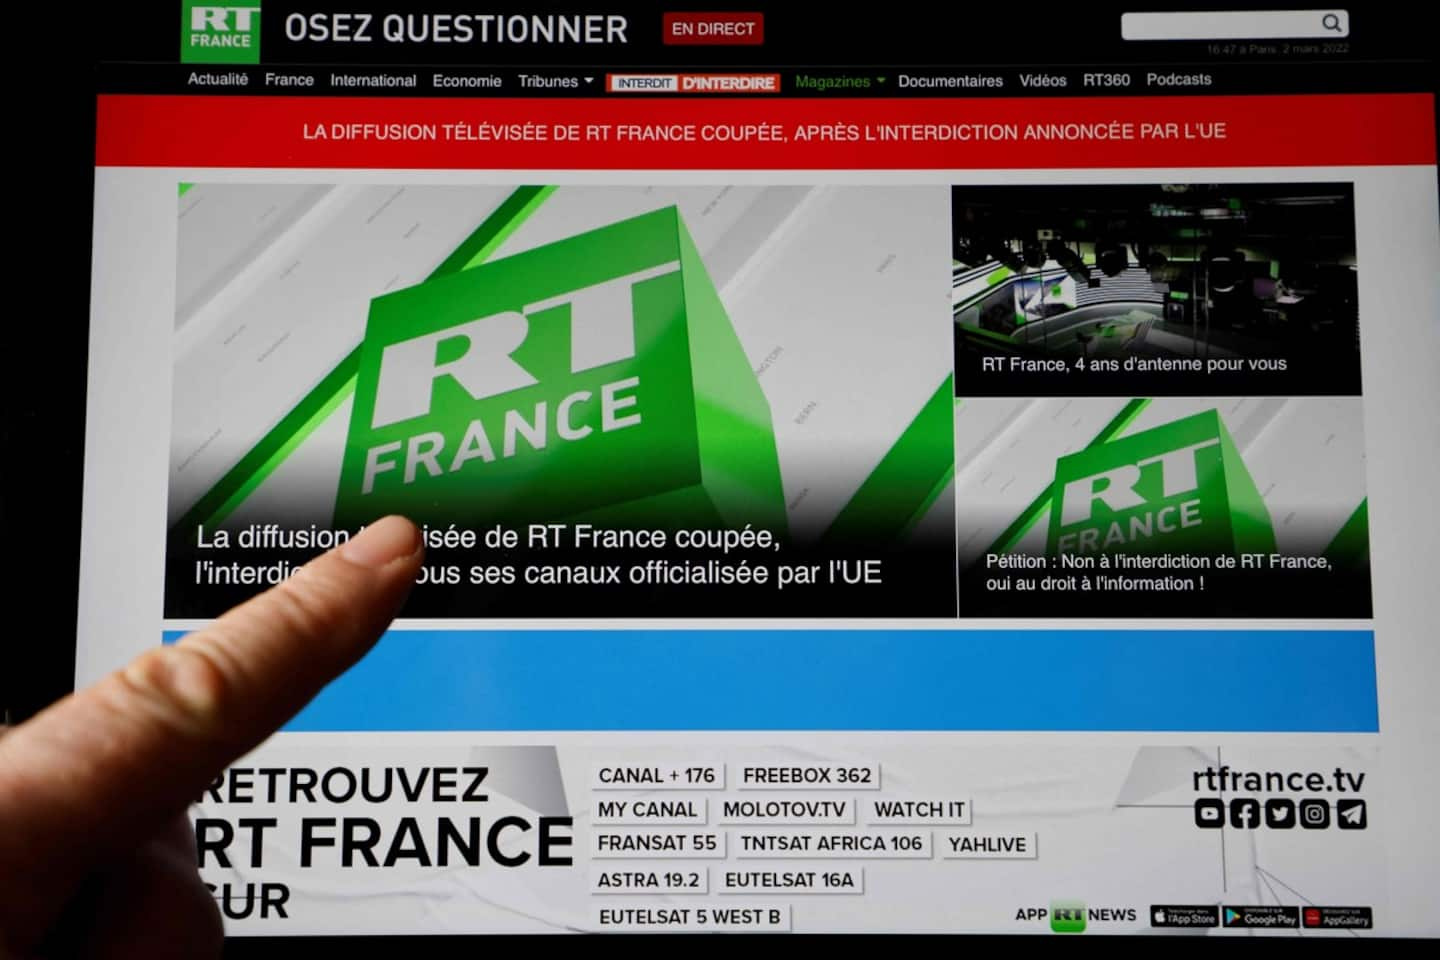 RT France: European justice confirms the suspension of the Russian media